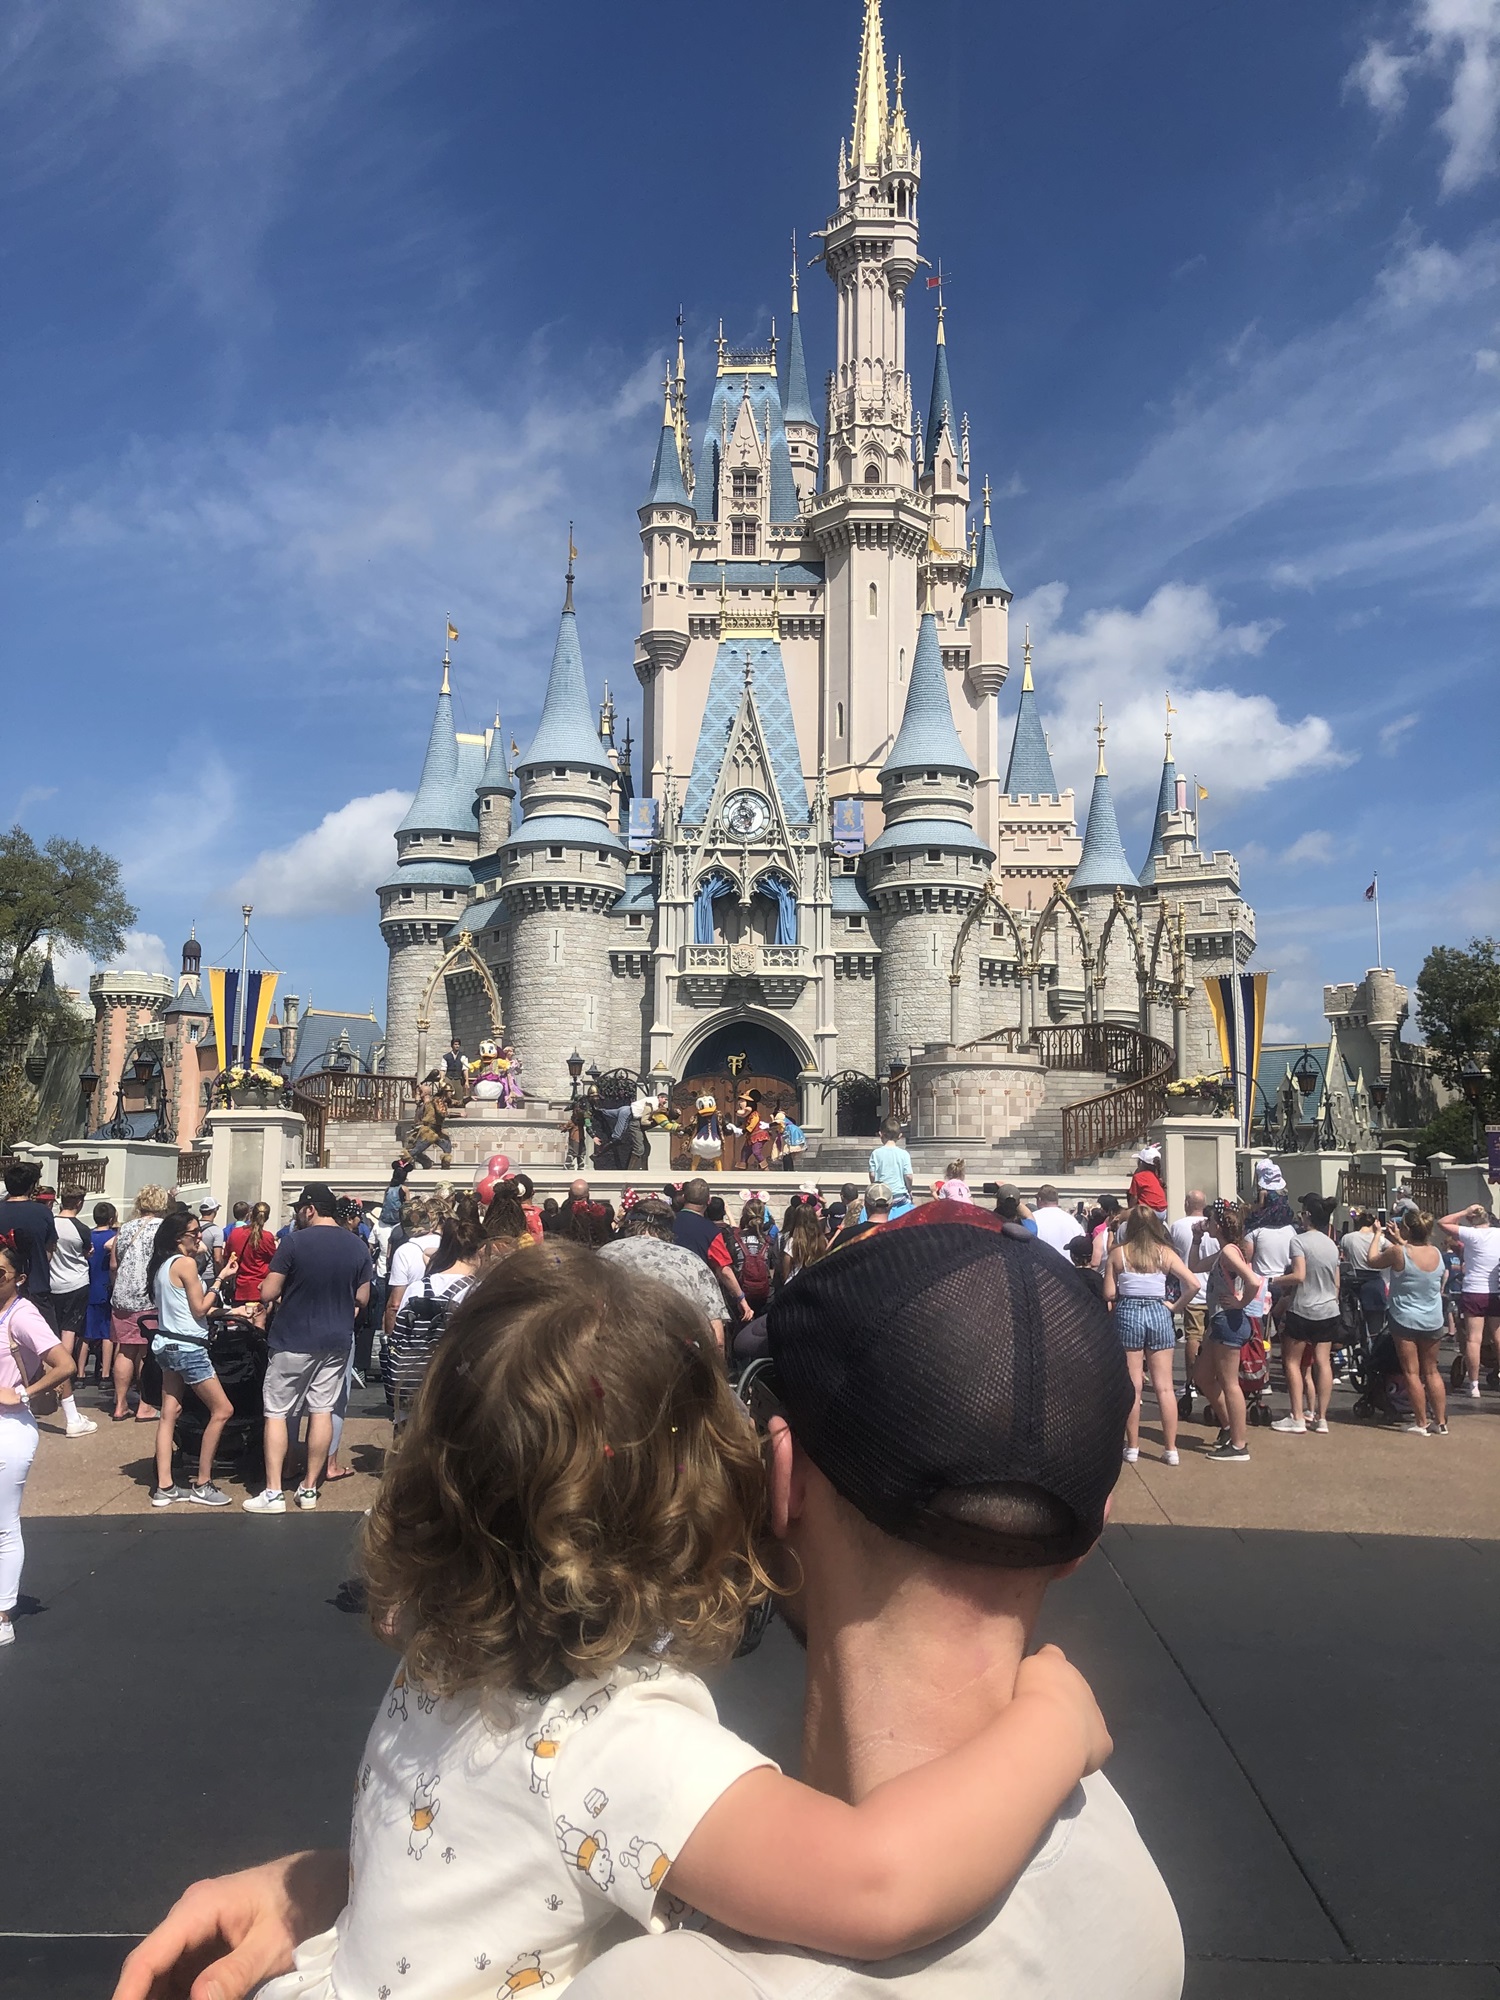 A father and his toddler watch a show in front of Cinderella's Castle in Magic Kingdom